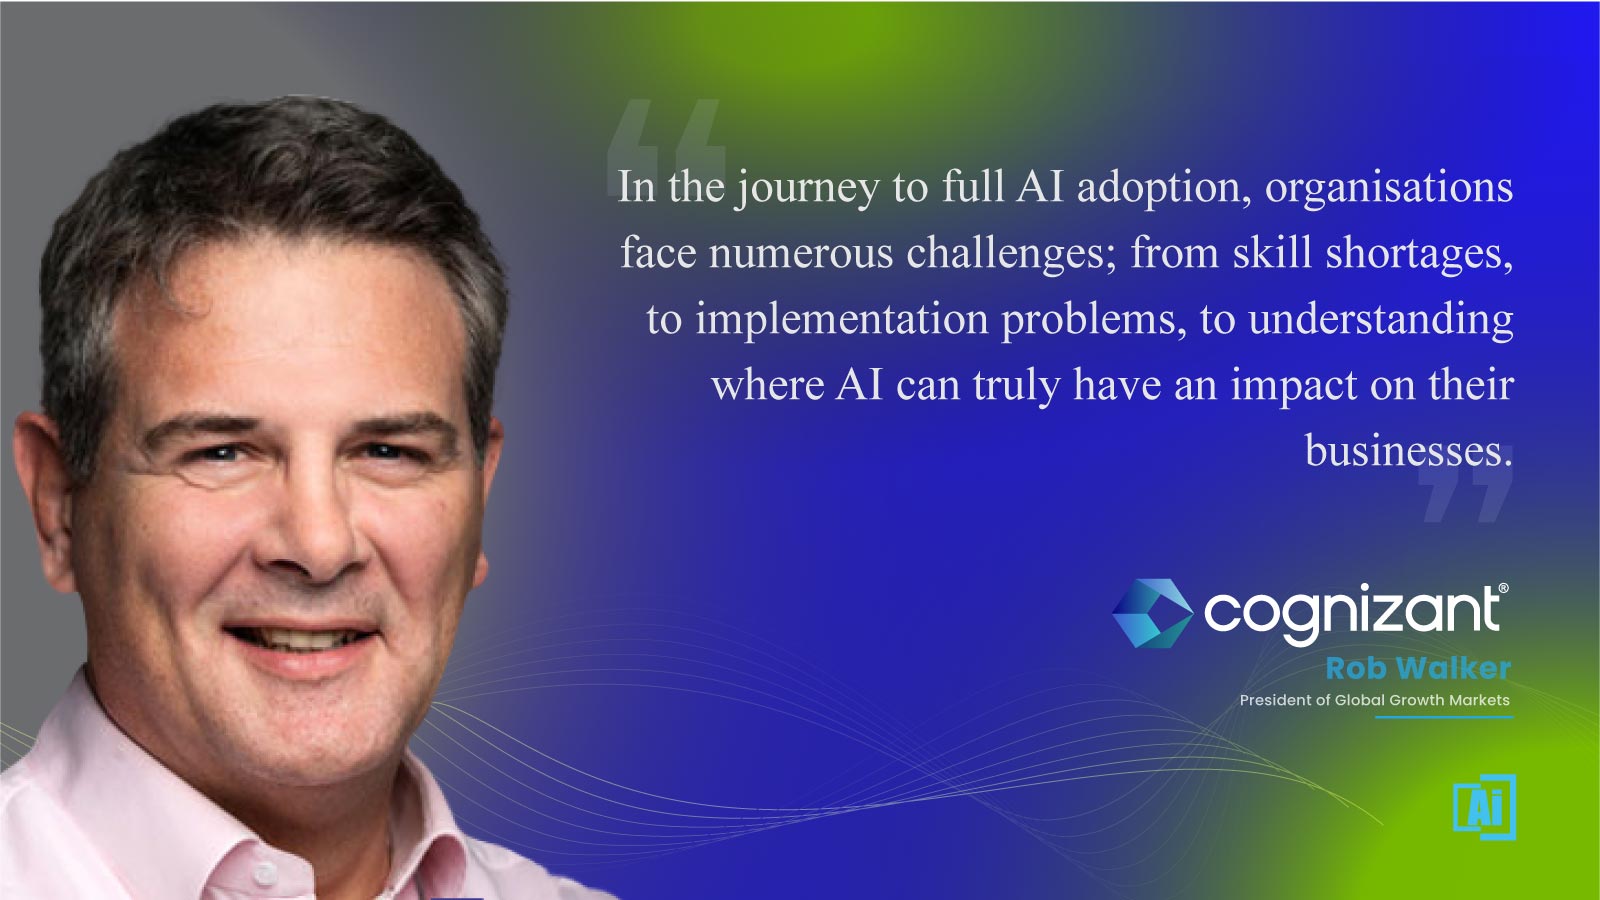 Rob Walker, President of Global Growth Markets at Cognizant